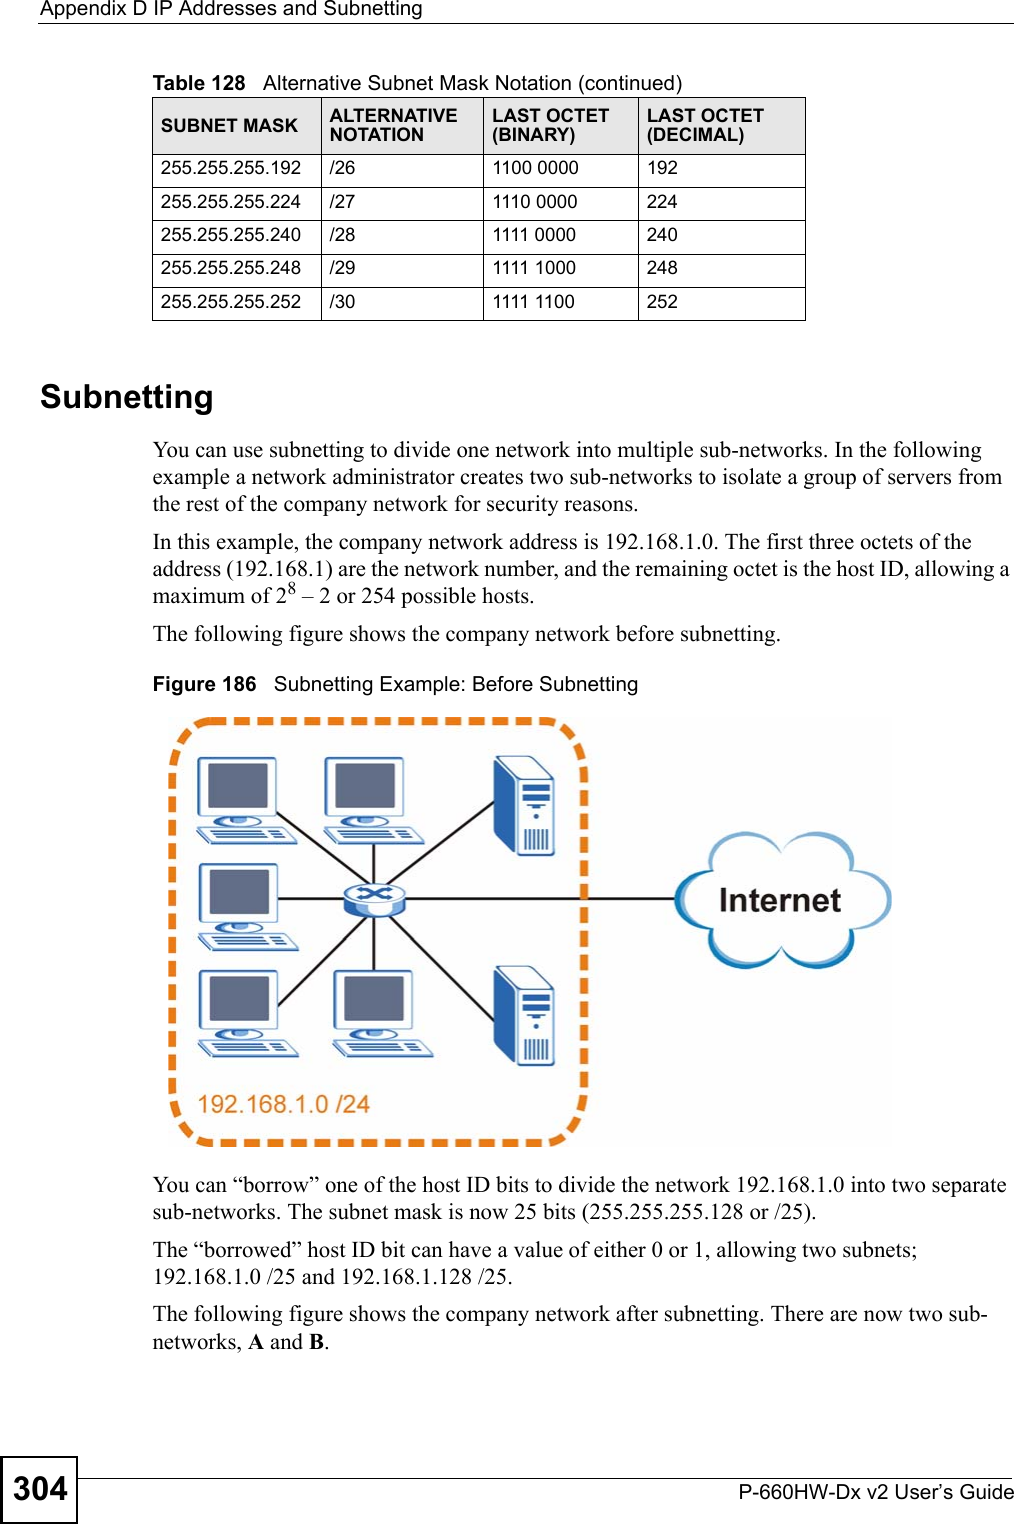 Appendix D IP Addresses and SubnettingP-660HW-Dx v2 User’s Guide304SubnettingYou can use subnetting to divide one network into multiple sub-networks. In the following example a network administrator creates two sub-networks to isolate a group of servers from the rest of the company network for security reasons.In this example, the company network address is 192.168.1.0. The first three octets of the address (192.168.1) are the network number, and the remaining octet is the host ID, allowing a maximum of 28 – 2 or 254 possible hosts.The following figure shows the company network before subnetting.  Figure 186   Subnetting Example: Before SubnettingYou can “borrow” one of the host ID bits to divide the network 192.168.1.0 into two separate sub-networks. The subnet mask is now 25 bits (255.255.255.128 or /25).The “borrowed” host ID bit can have a value of either 0 or 1, allowing two subnets; 192.168.1.0 /25 and 192.168.1.128 /25. The following figure shows the company network after subnetting. There are now two sub-networks, A and B. 255.255.255.192 /26 1100 0000 192255.255.255.224 /27 1110 0000 224255.255.255.240 /28 1111 0000 240255.255.255.248 /29 1111 1000 248255.255.255.252 /30 1111 1100 252Table 128   Alternative Subnet Mask Notation (continued)SUBNET MASK ALTERNATIVE NOTATIONLAST OCTET (BINARY)LAST OCTET (DECIMAL)